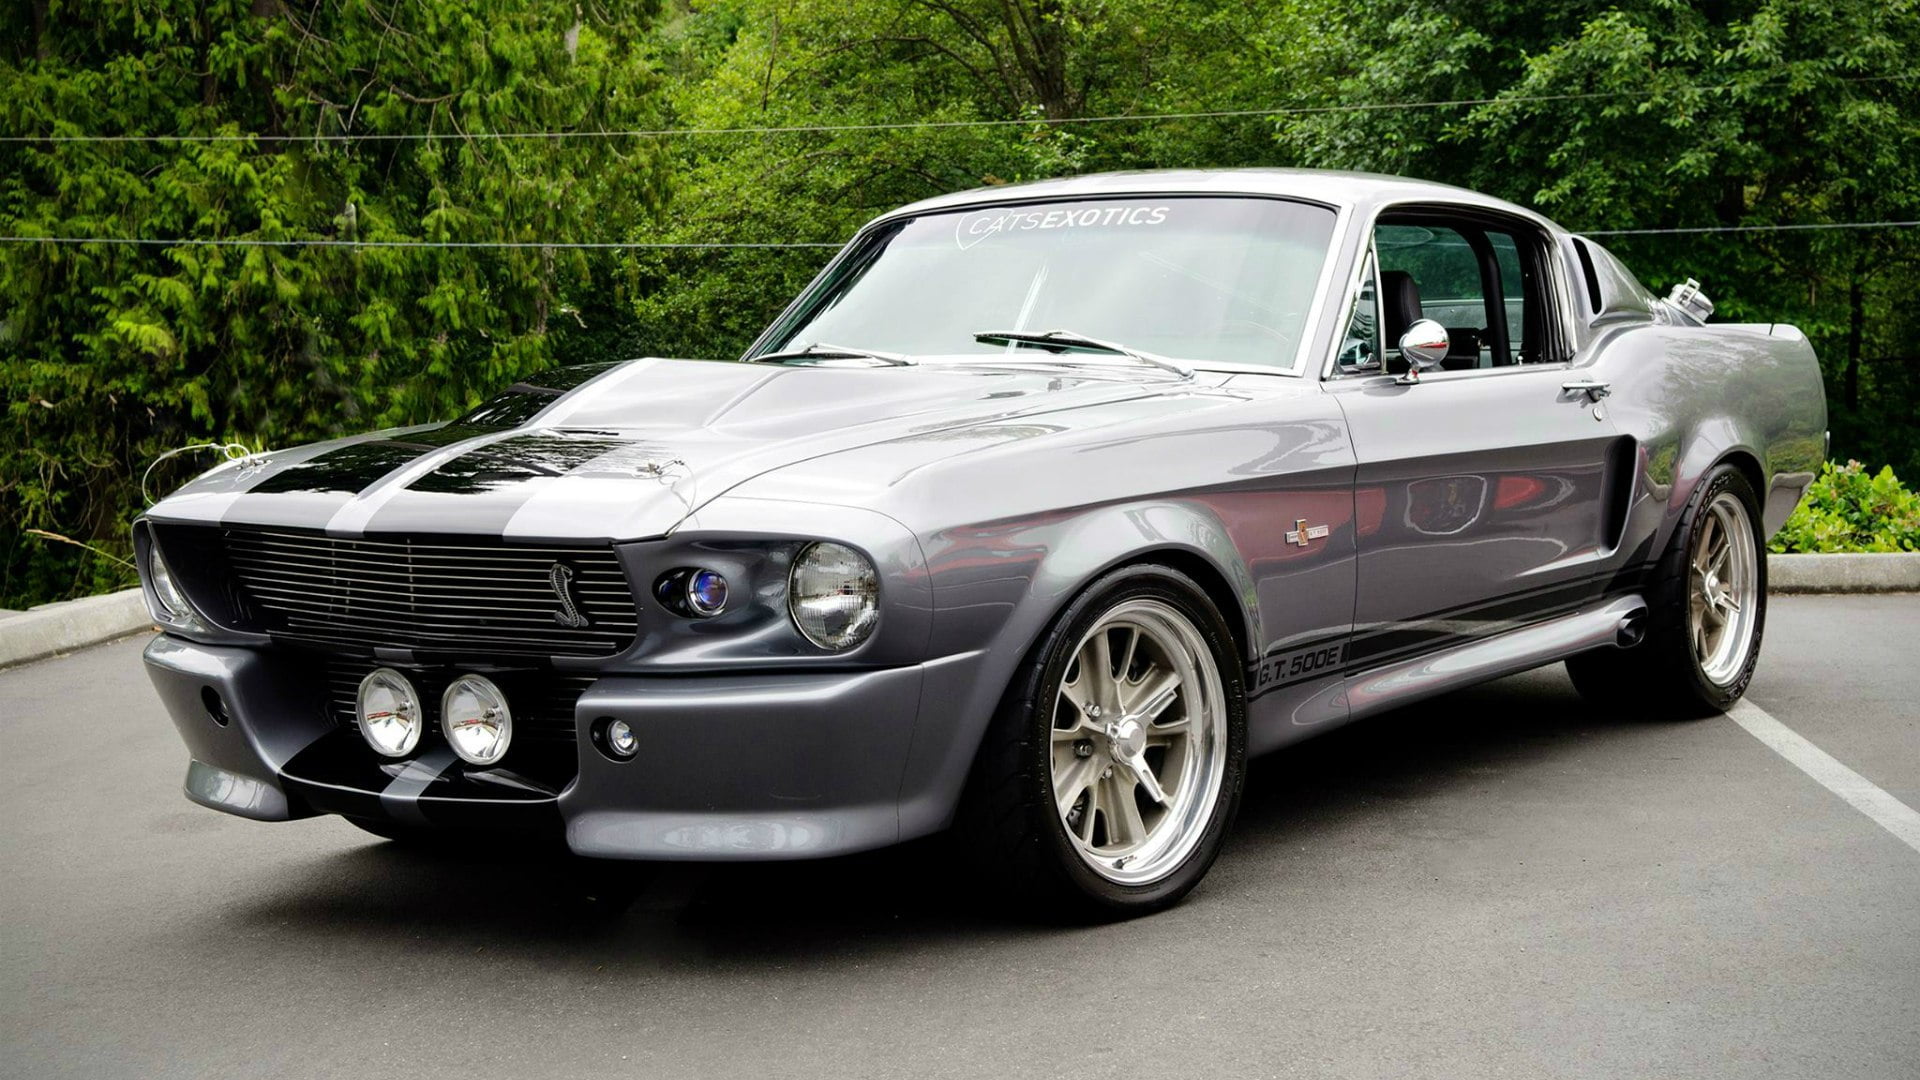 gray Shelby GT500, Mustang, Ford, Eleanor, GT 500, Muscle car